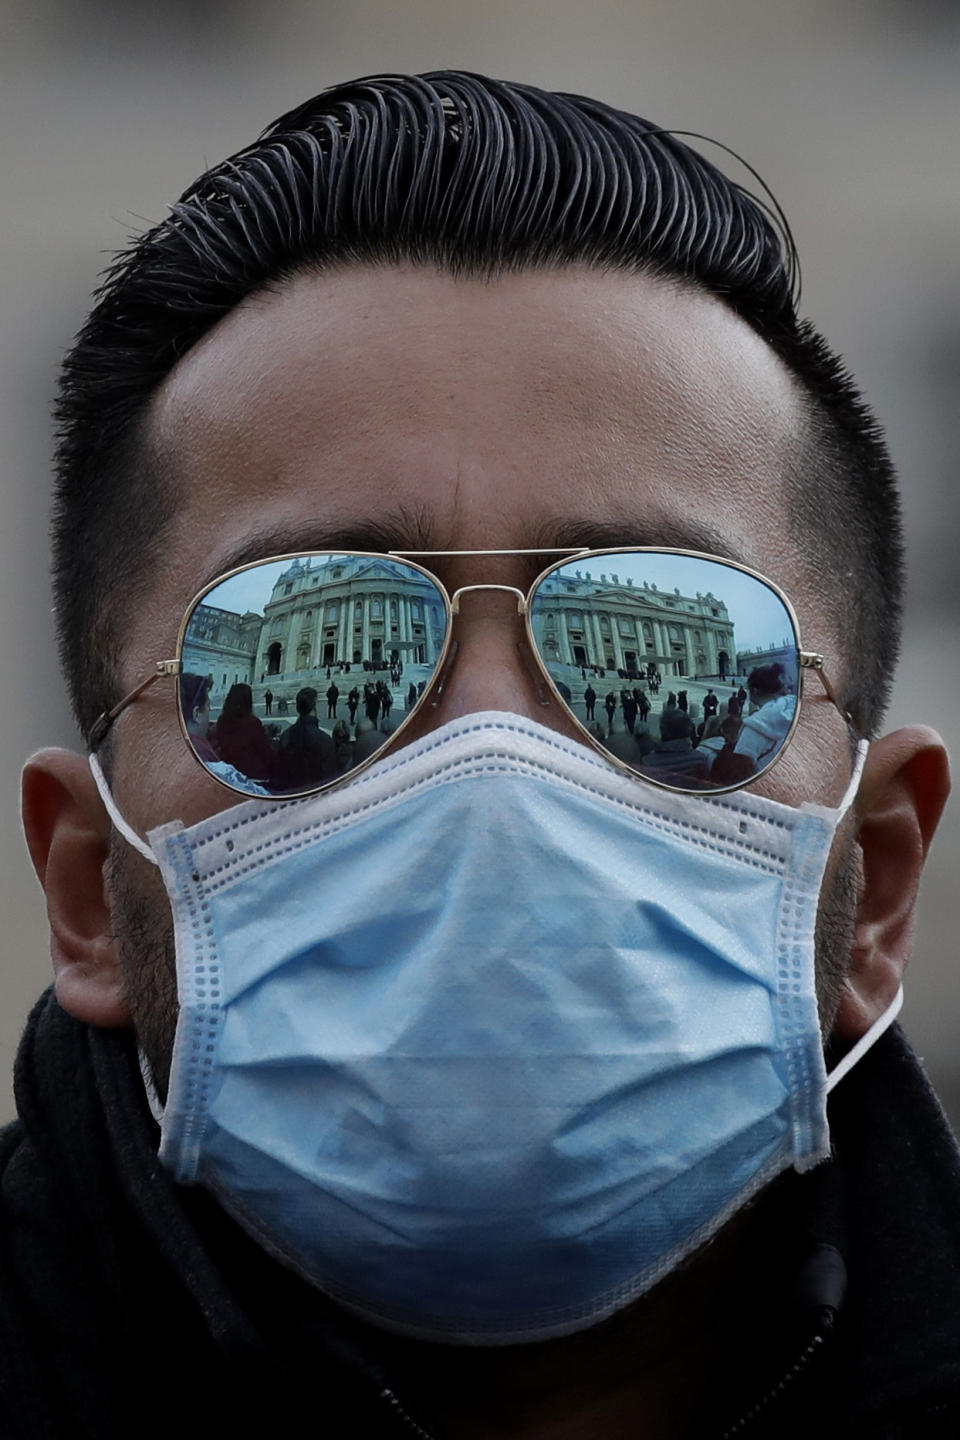 A man wears a face mask in St. Peter's Square at the Vatican during Pope Francis' weekly general audience, Wednesday, Feb. 26, 2020. The viral outbreak that began in China and has infected more than 80,000 people globally, so far caused 323 cases and 11 deaths in Italy. (AP Photo/Alessandra Tarantino)